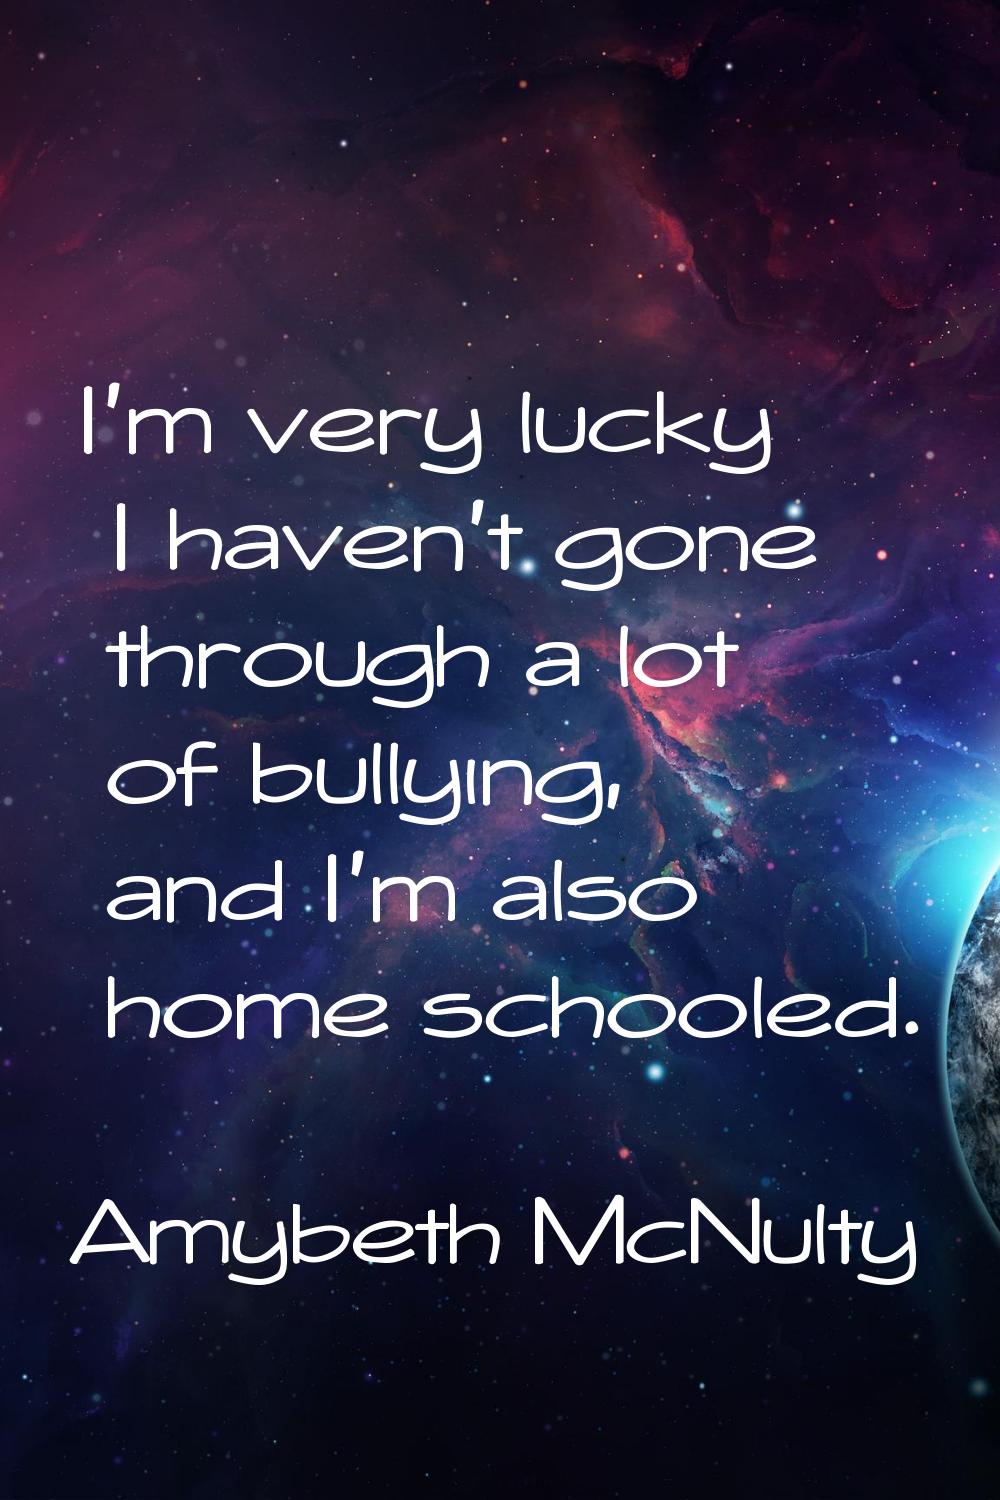 I'm very lucky I haven't gone through a lot of bullying, and I'm also home schooled.